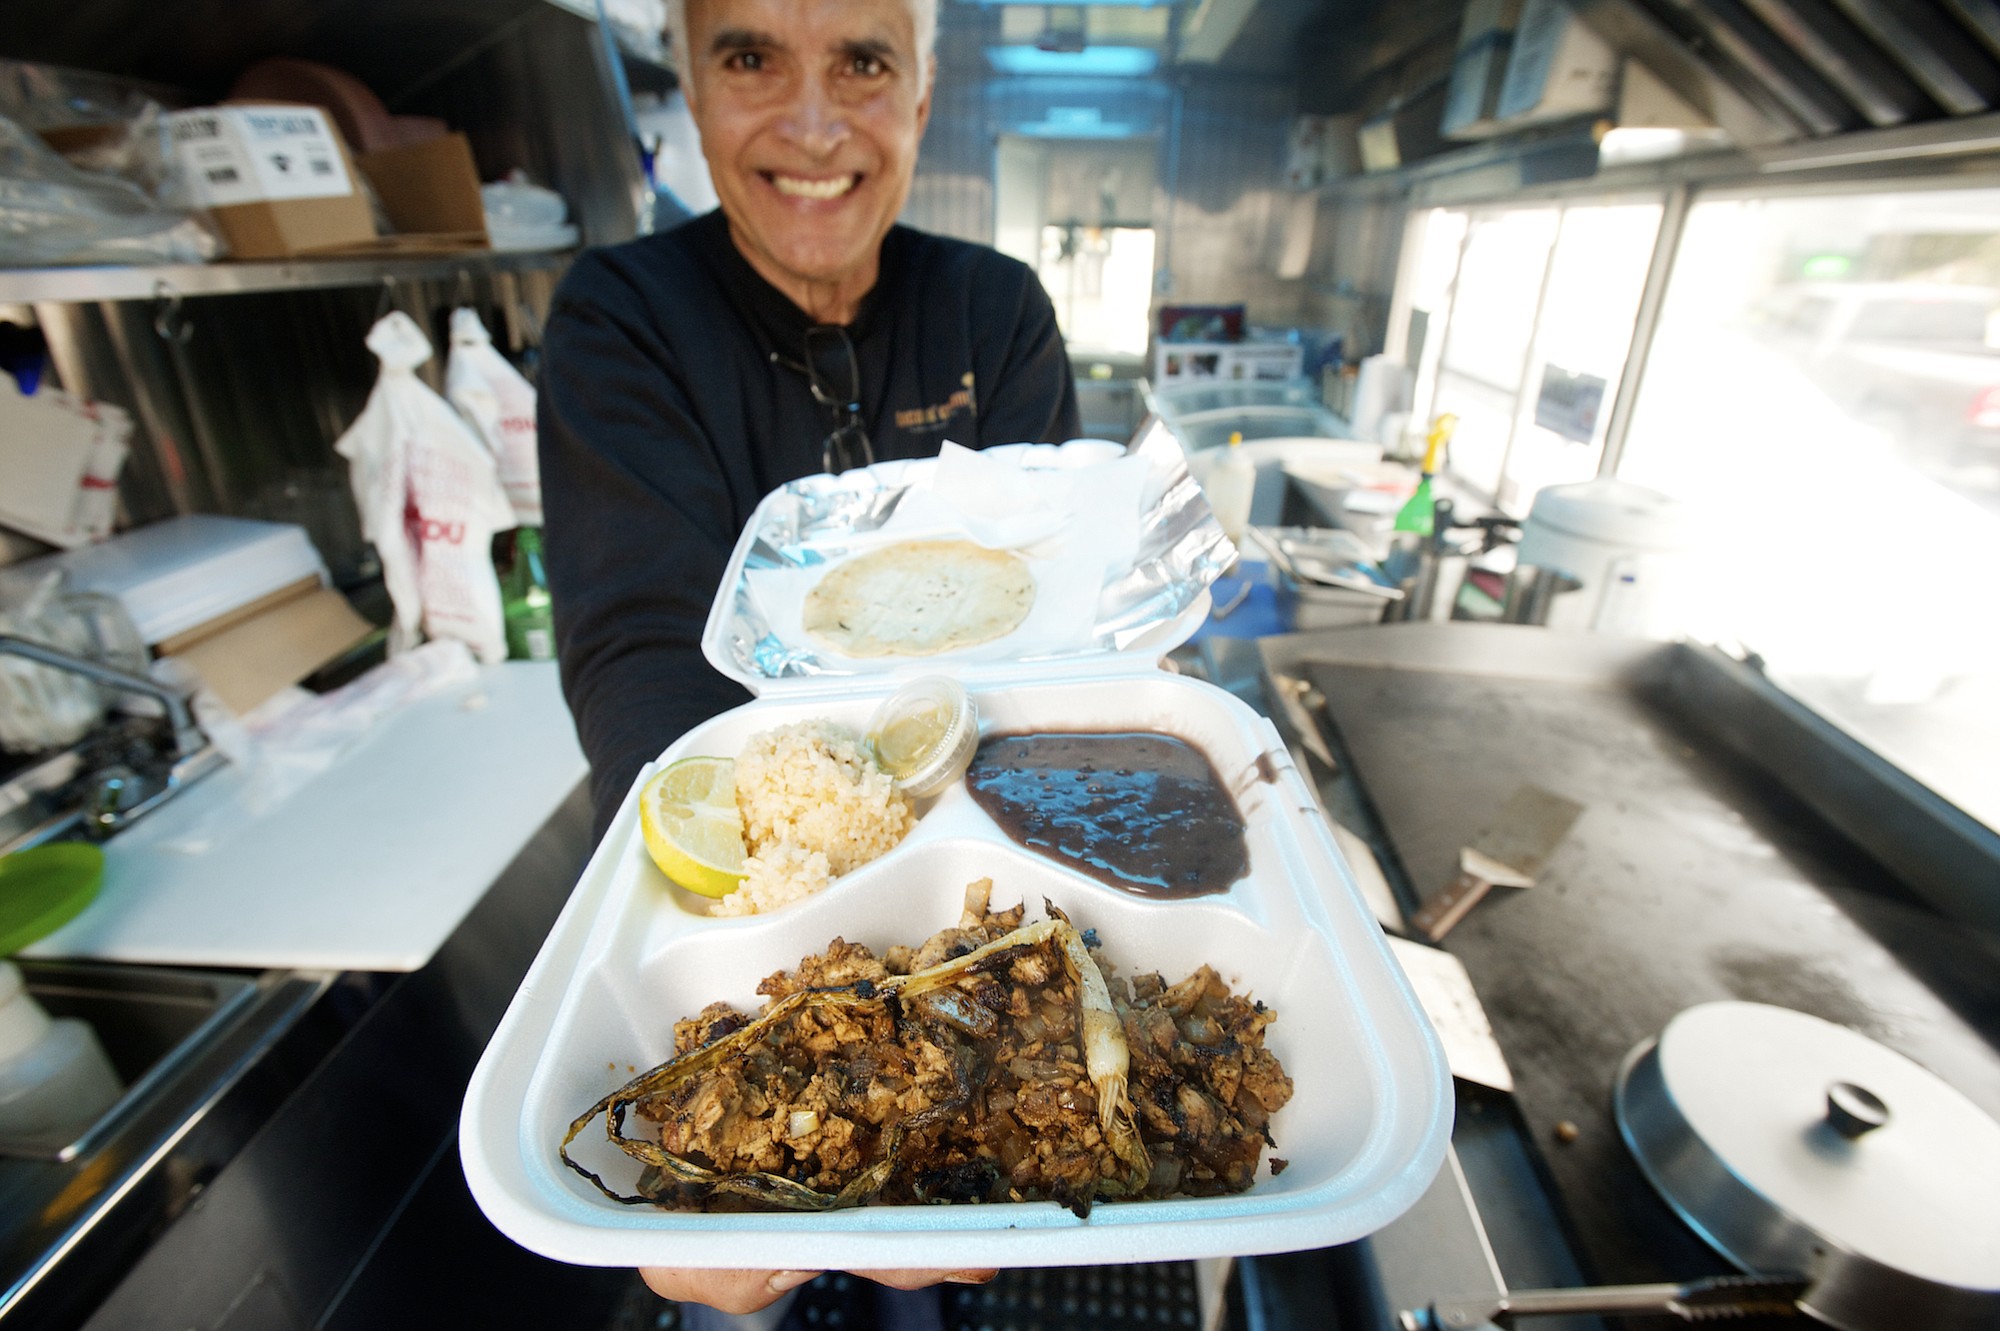 Chester-Castillo Morales, owner of the Tacos n' Cream food truck, shows the El Chico Plato chicken taco meal on Jan.